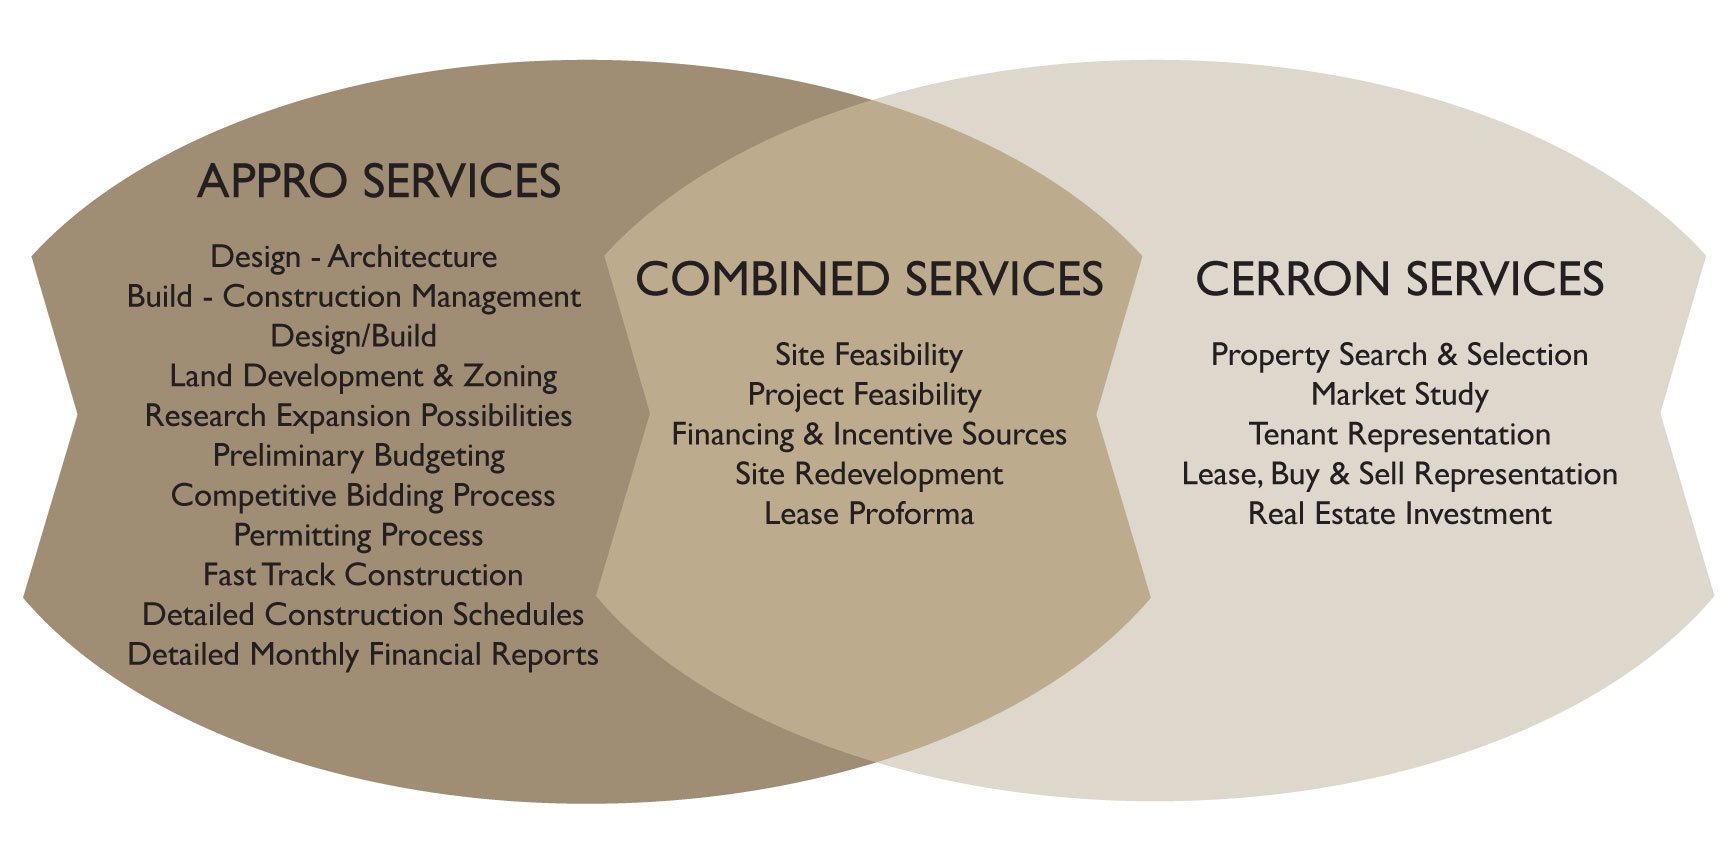 Appro-Cerron-Services_with-type.jpg